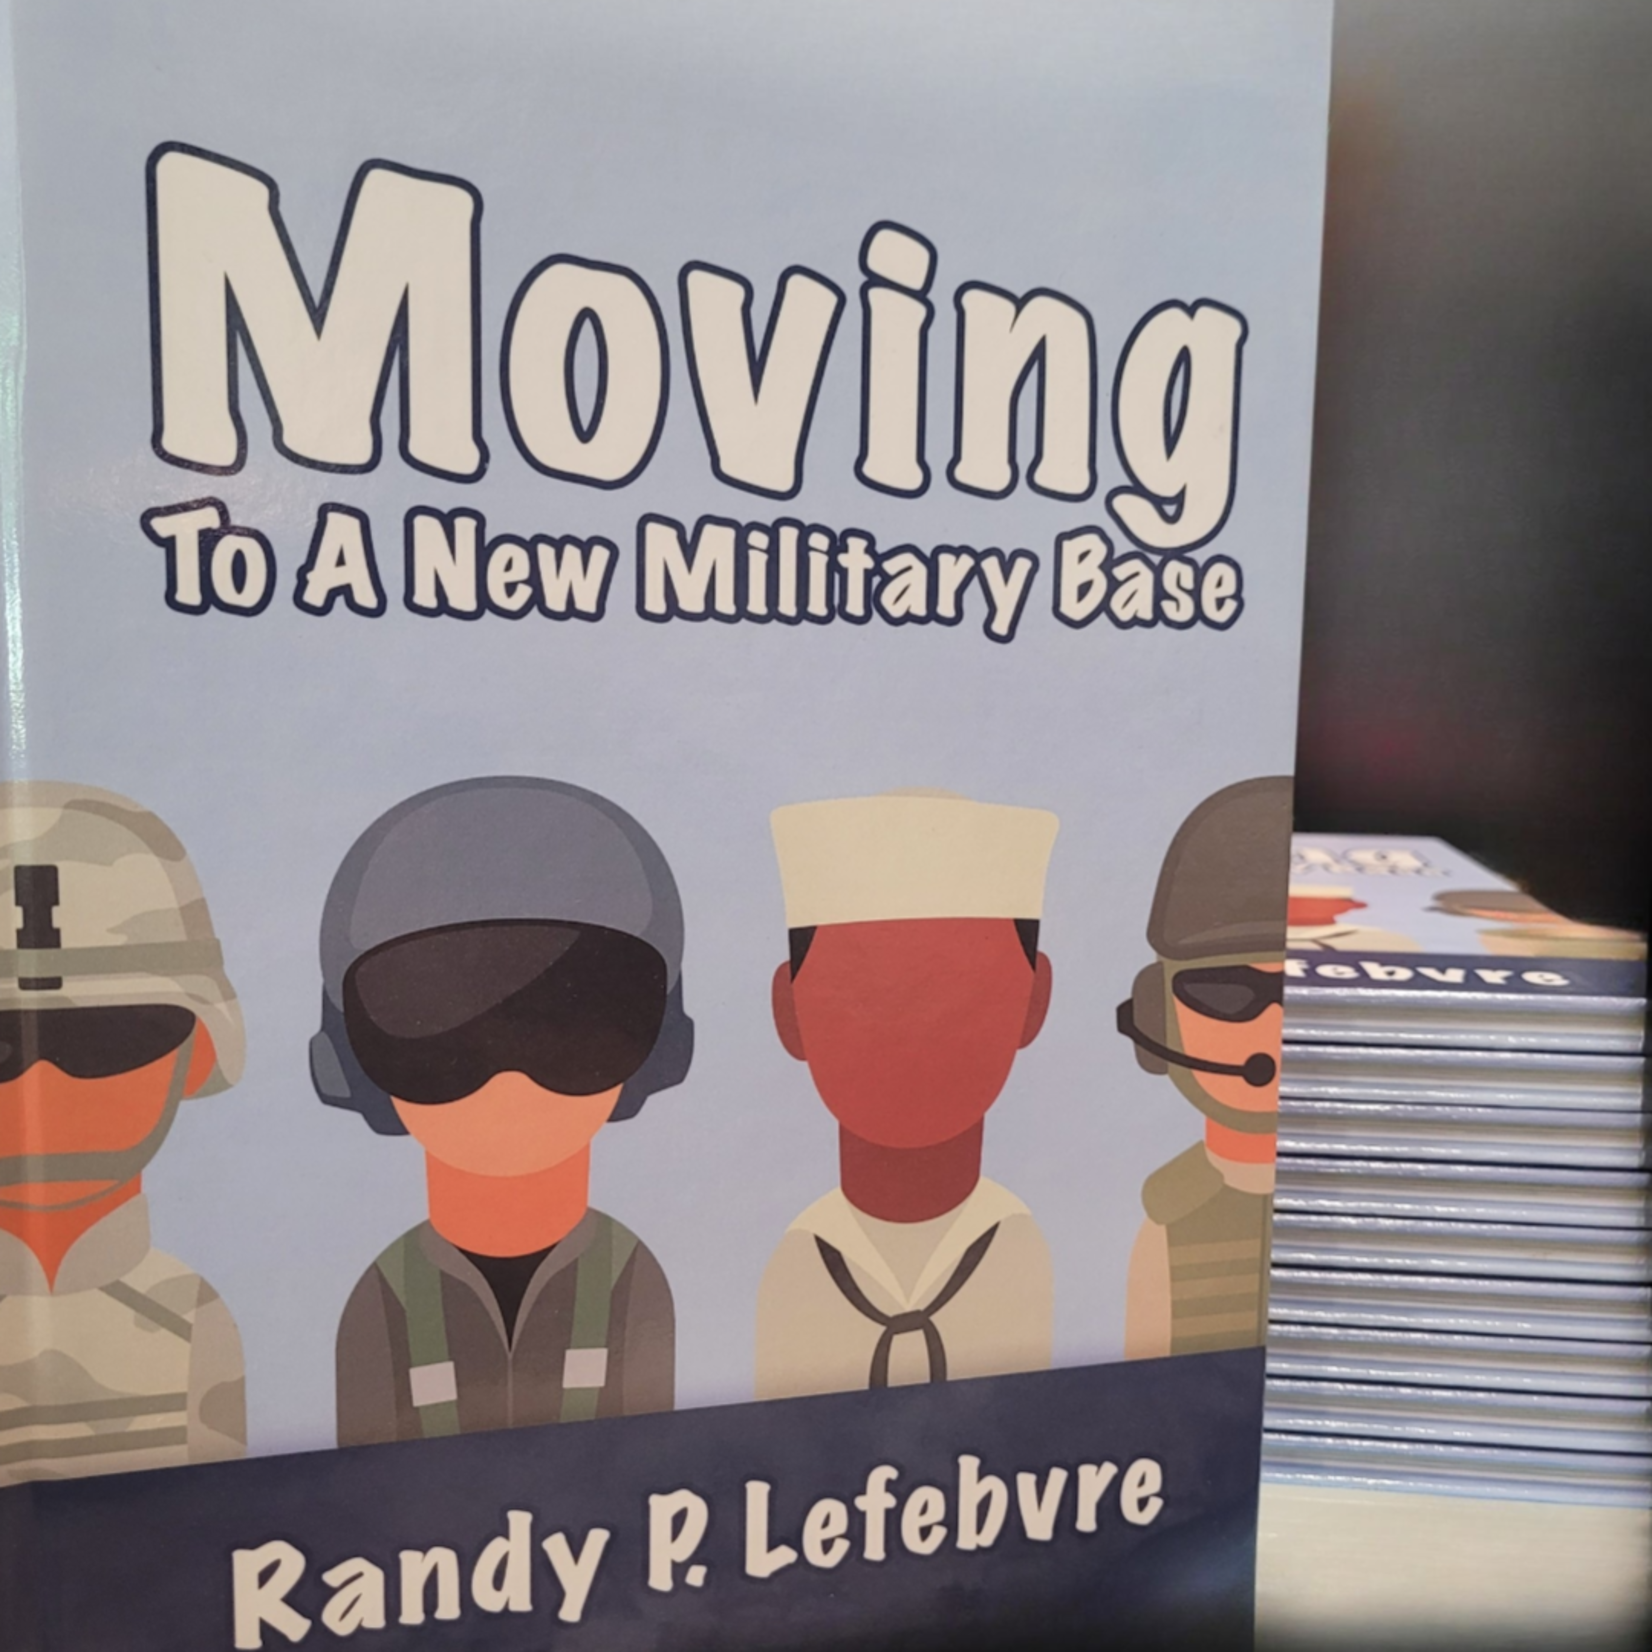 "Moving to a New Military Base"